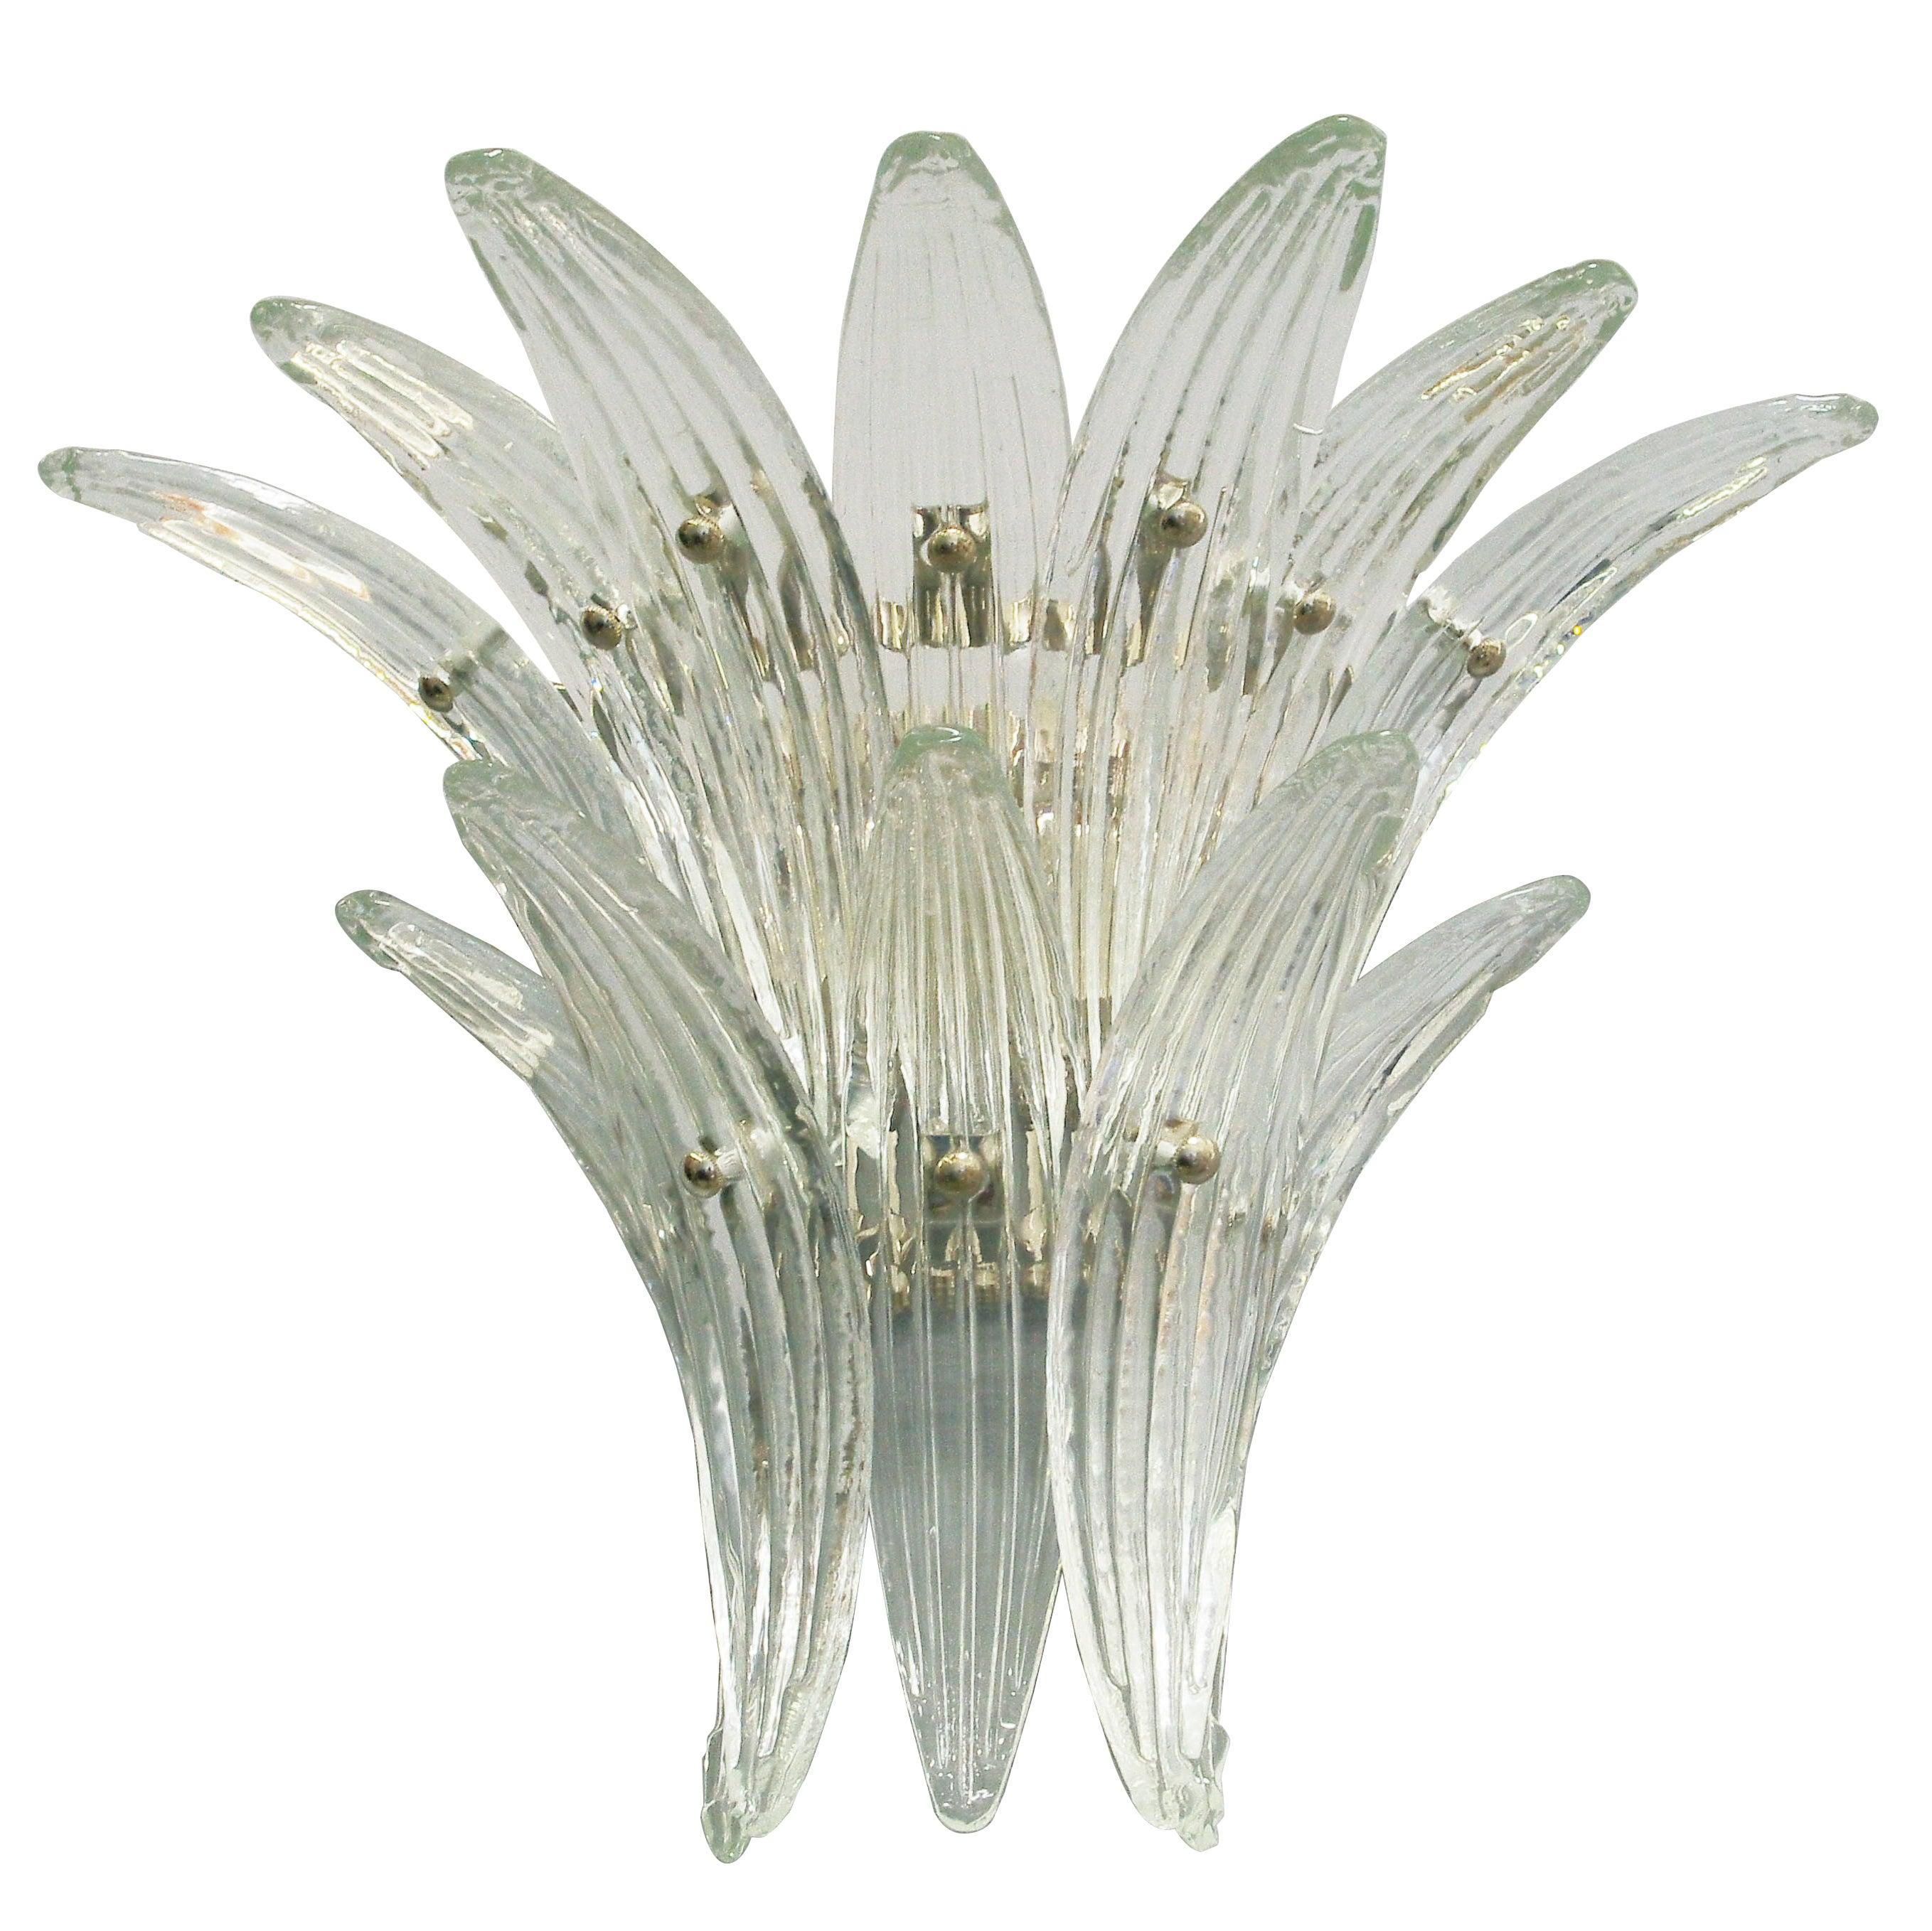 Italian Palmette wall light with 12 clear Murano glass leaves mounted on chrome finish metal frame. Designed by Fabio Bergomi for Fabio Ltd / Made in Italy
2 lights / E12 or E14 type / max 40W each
Measures: Height 15 inches, width 19 inches, depth